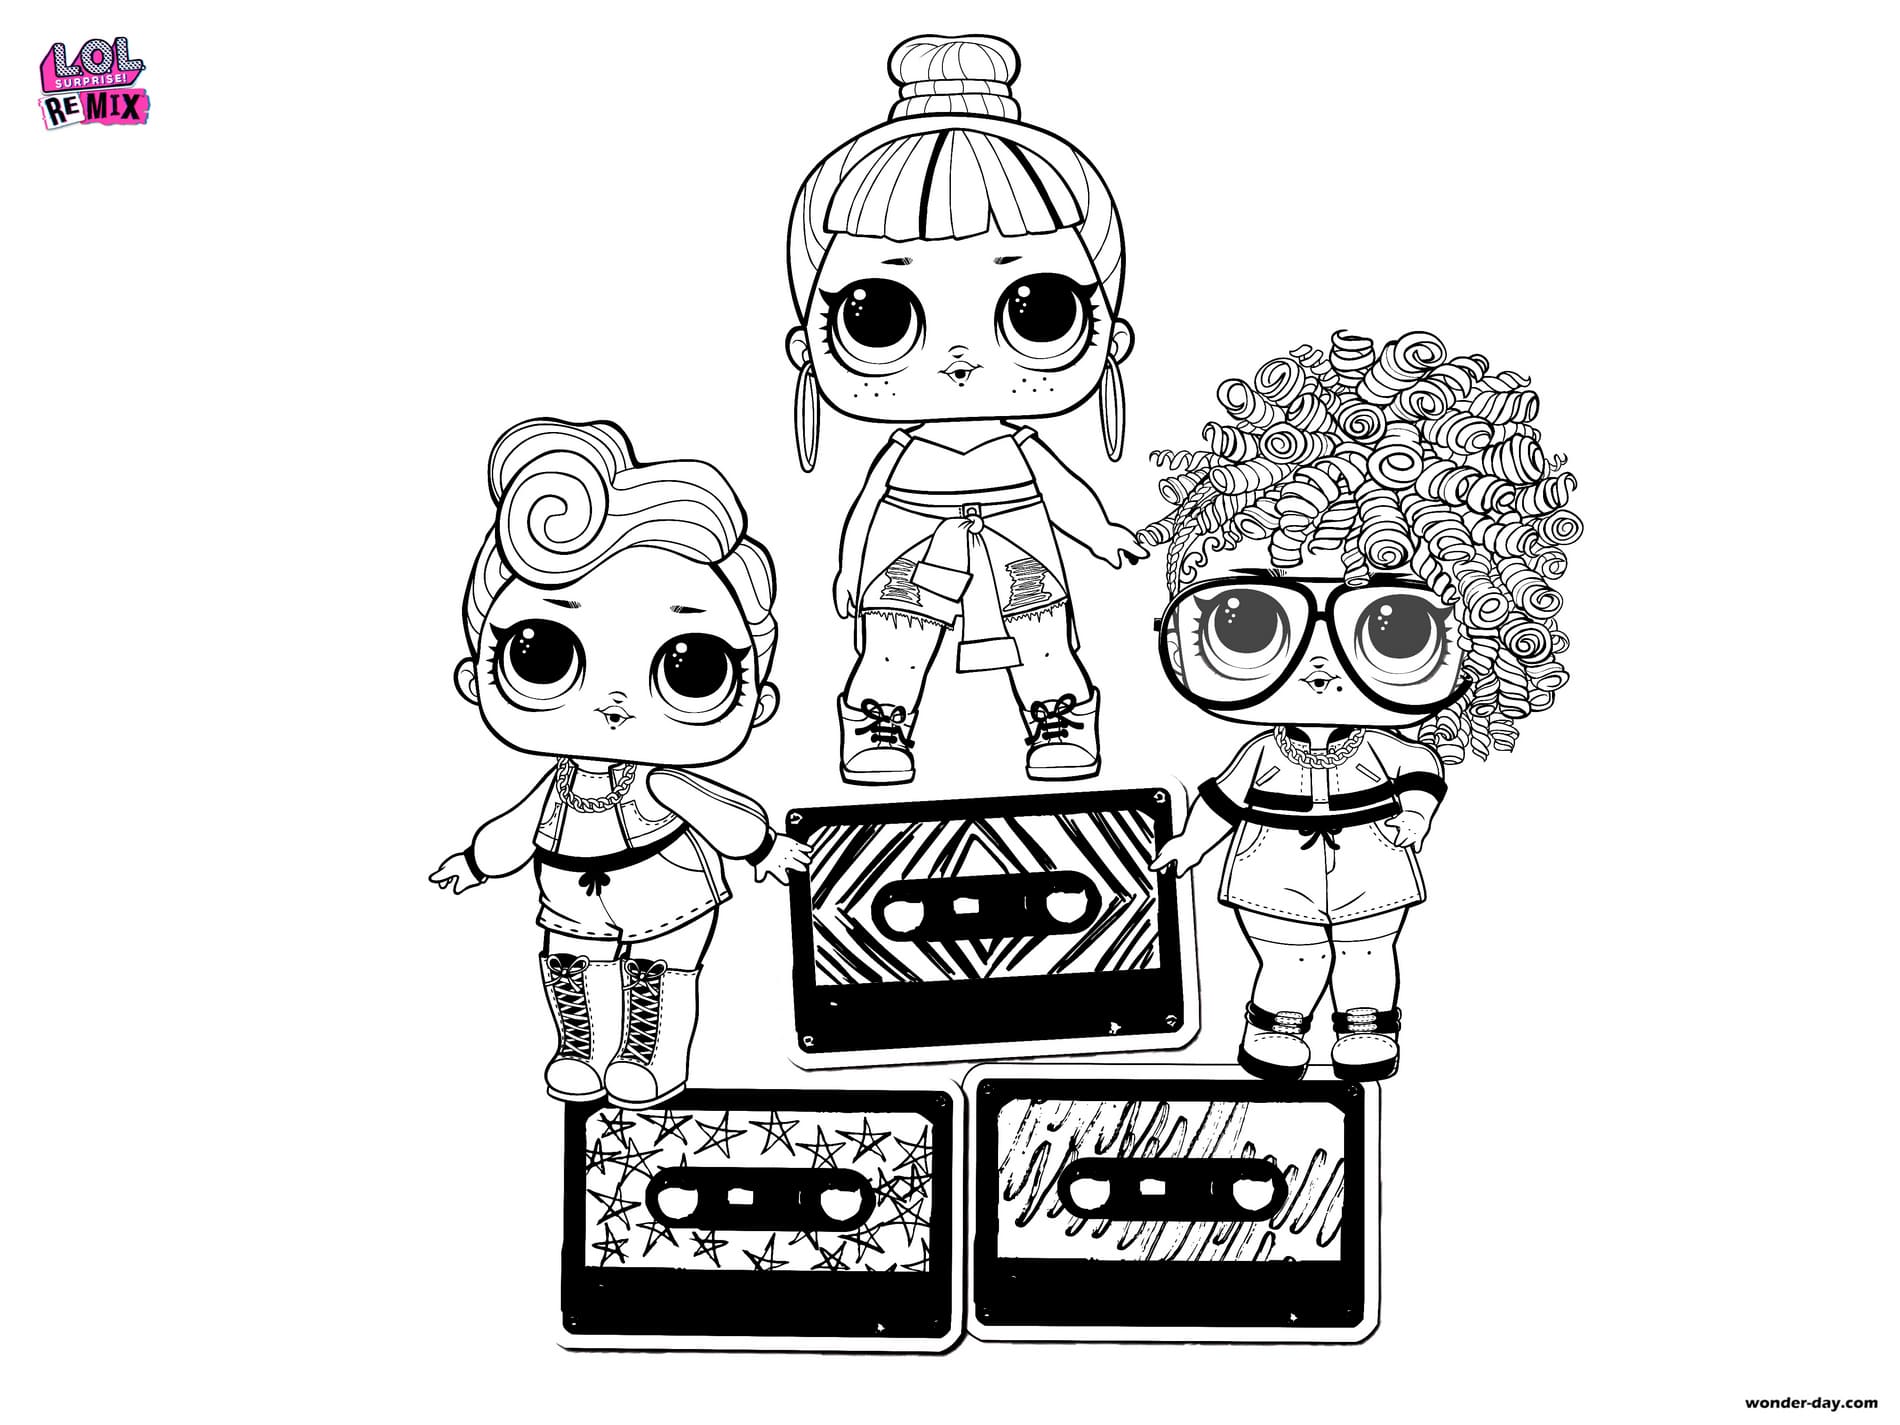 LOL Surprise Dolls Coloring Pages. Print in A20 format